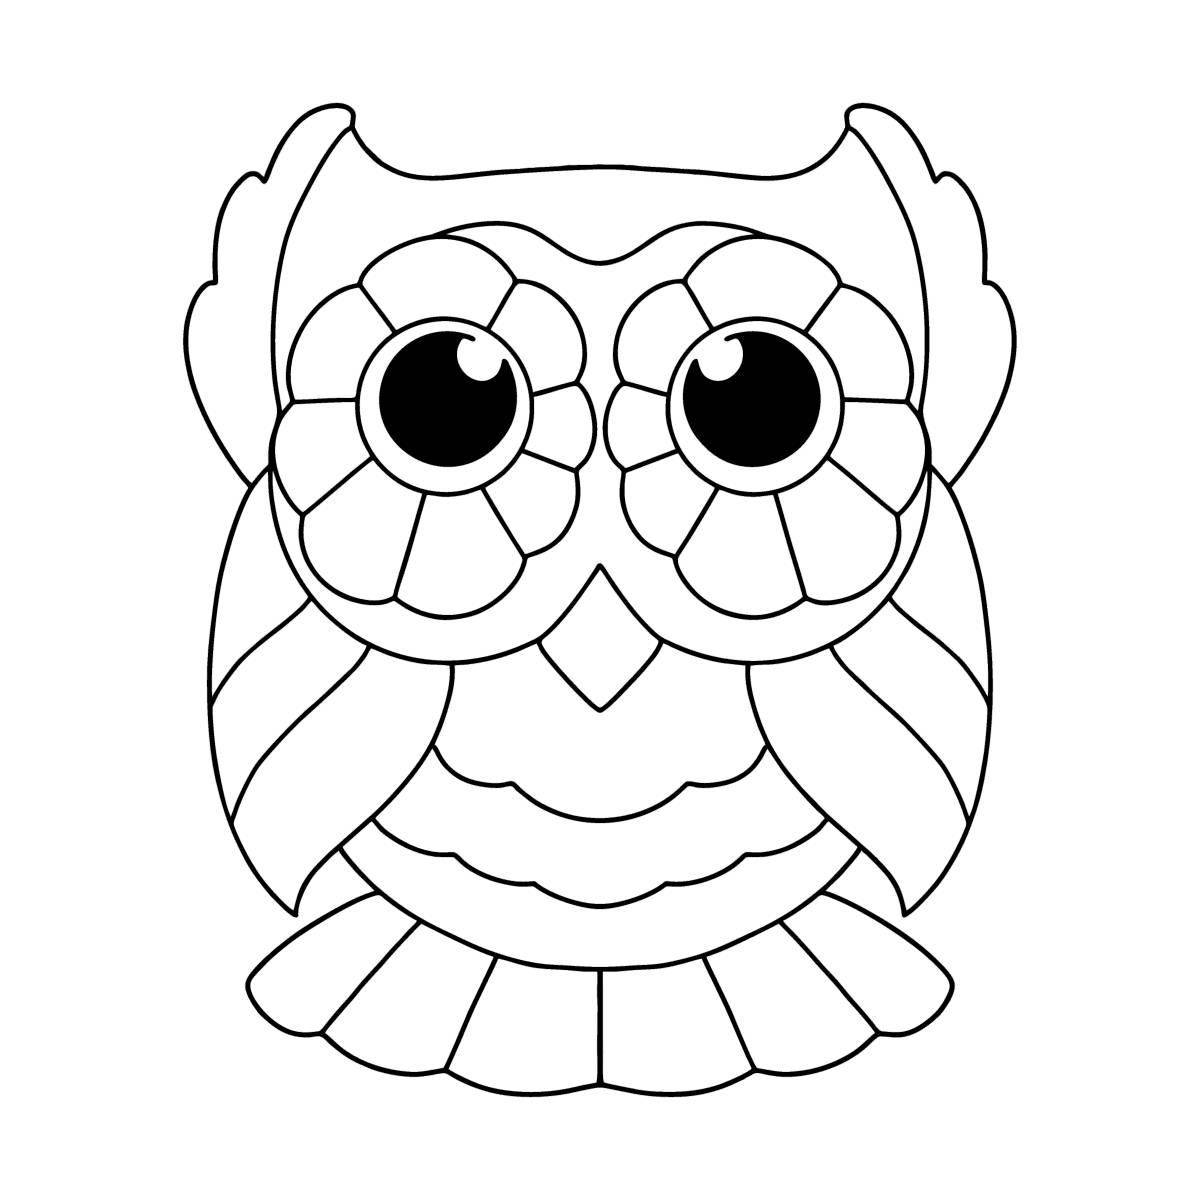 Owl for children 3 4 years old #1